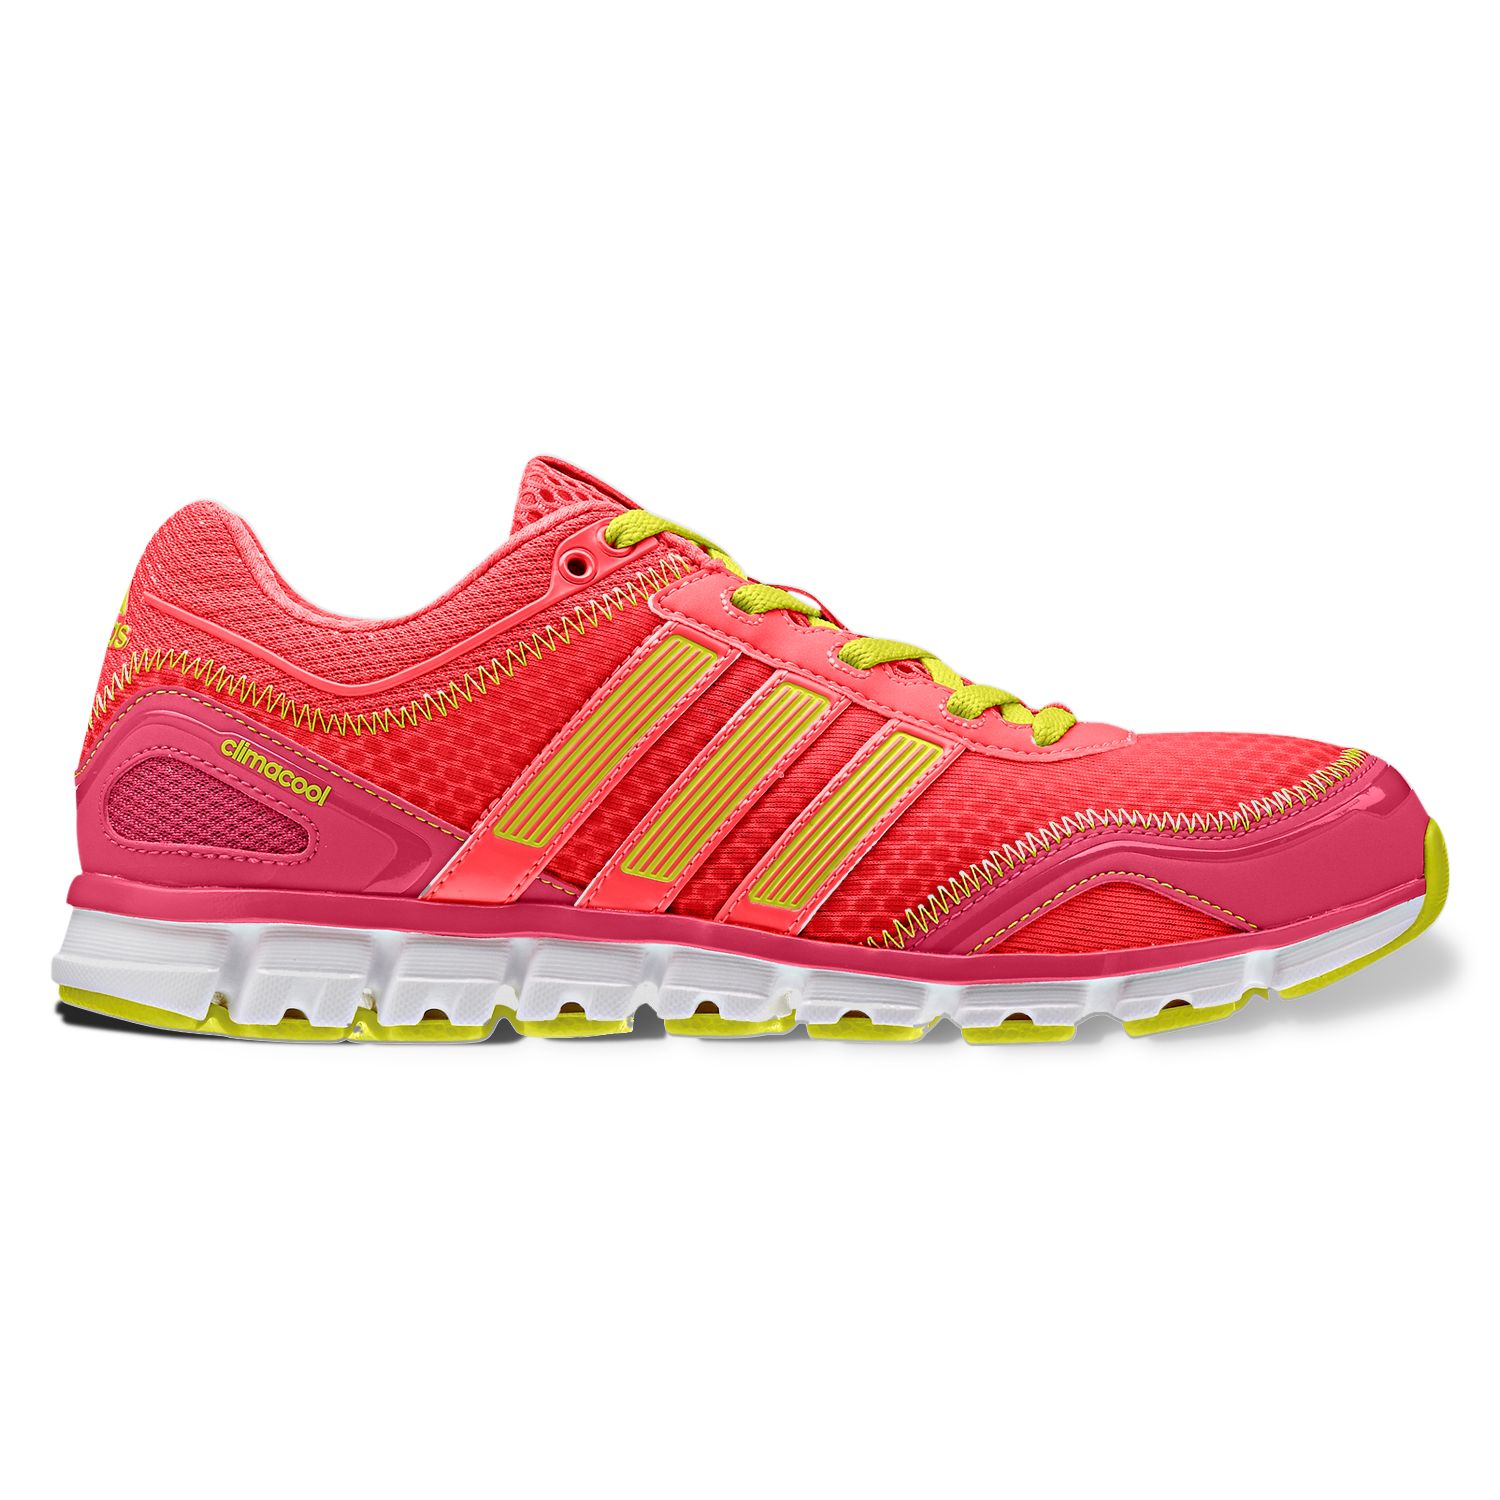 adidas climacool women's running shoes